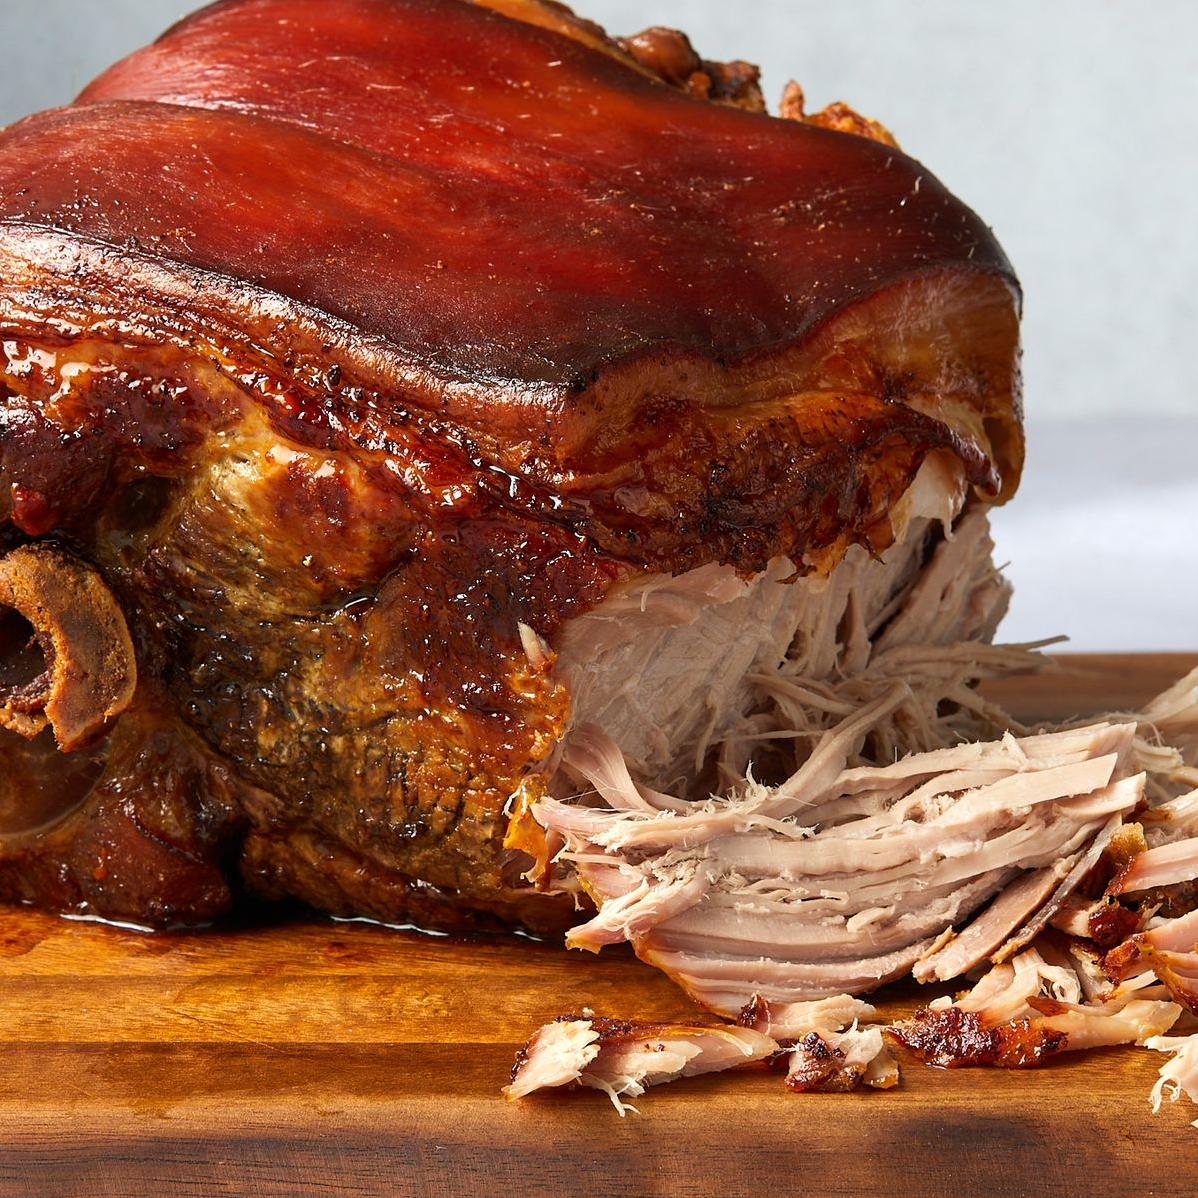  The crispy skin of the Pernil is irresistible, just look at that golden-brown color!